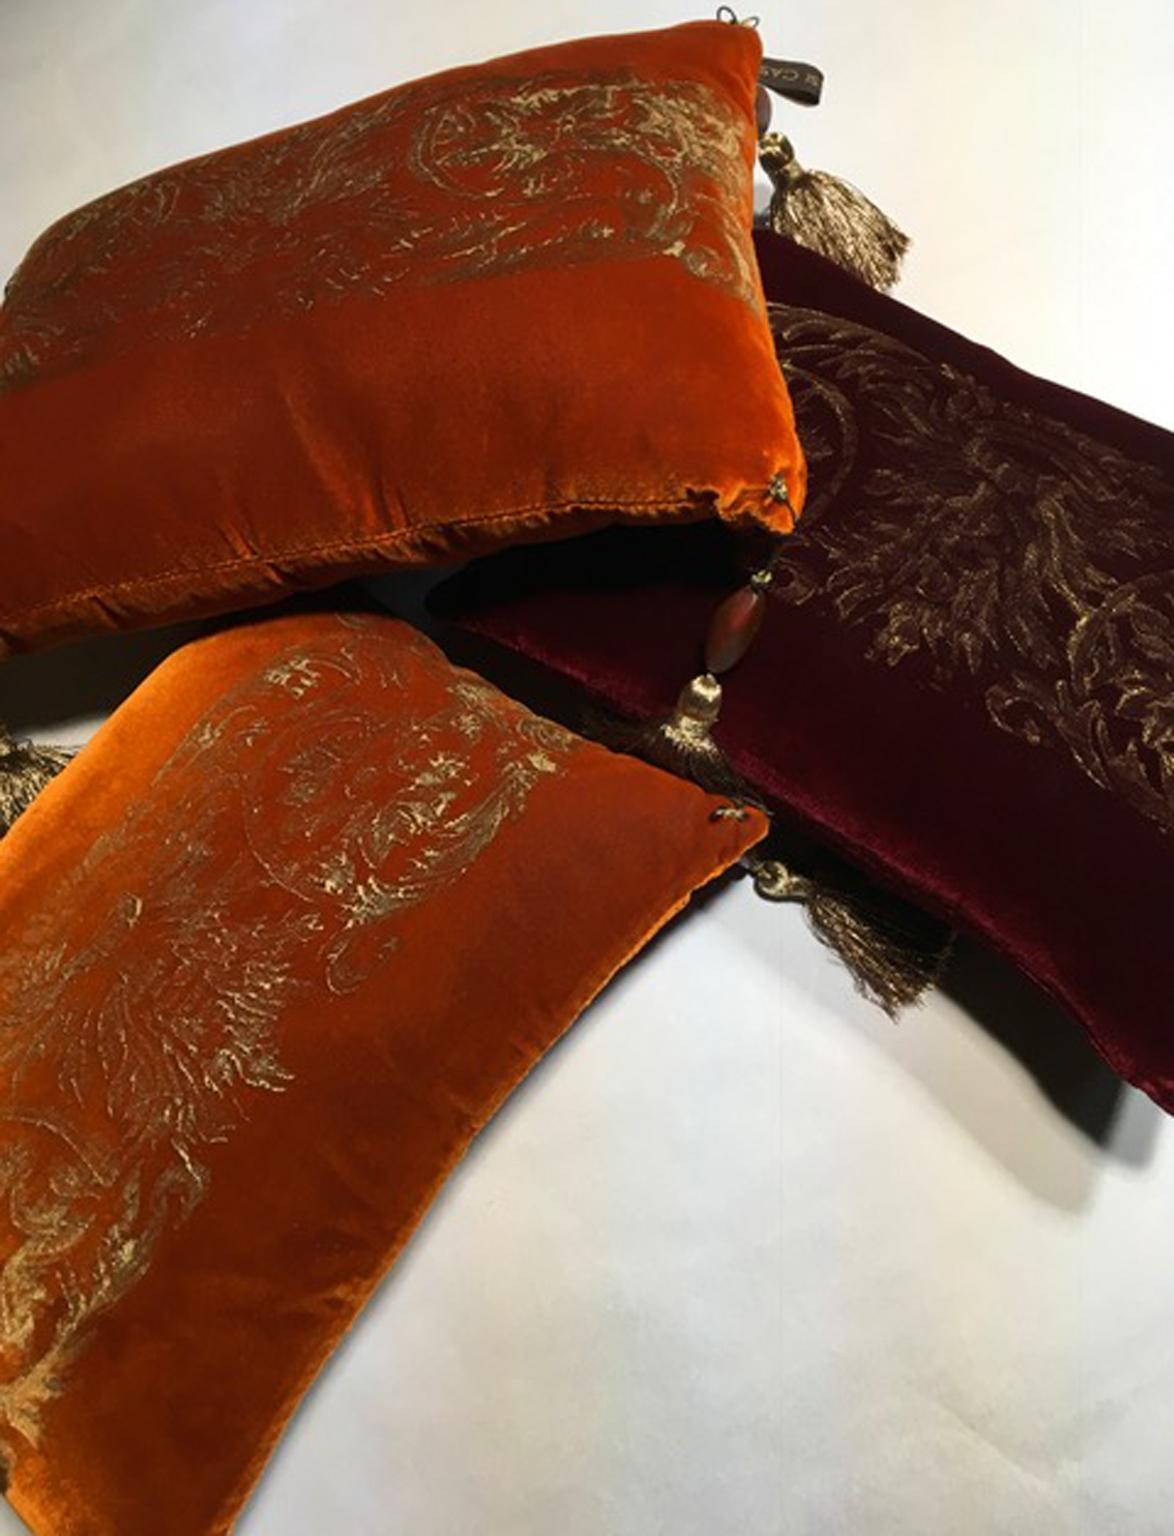 Baroque Fortuny Venice Style Set Three Orange Silk Pillows in Golden Color Hand Printed